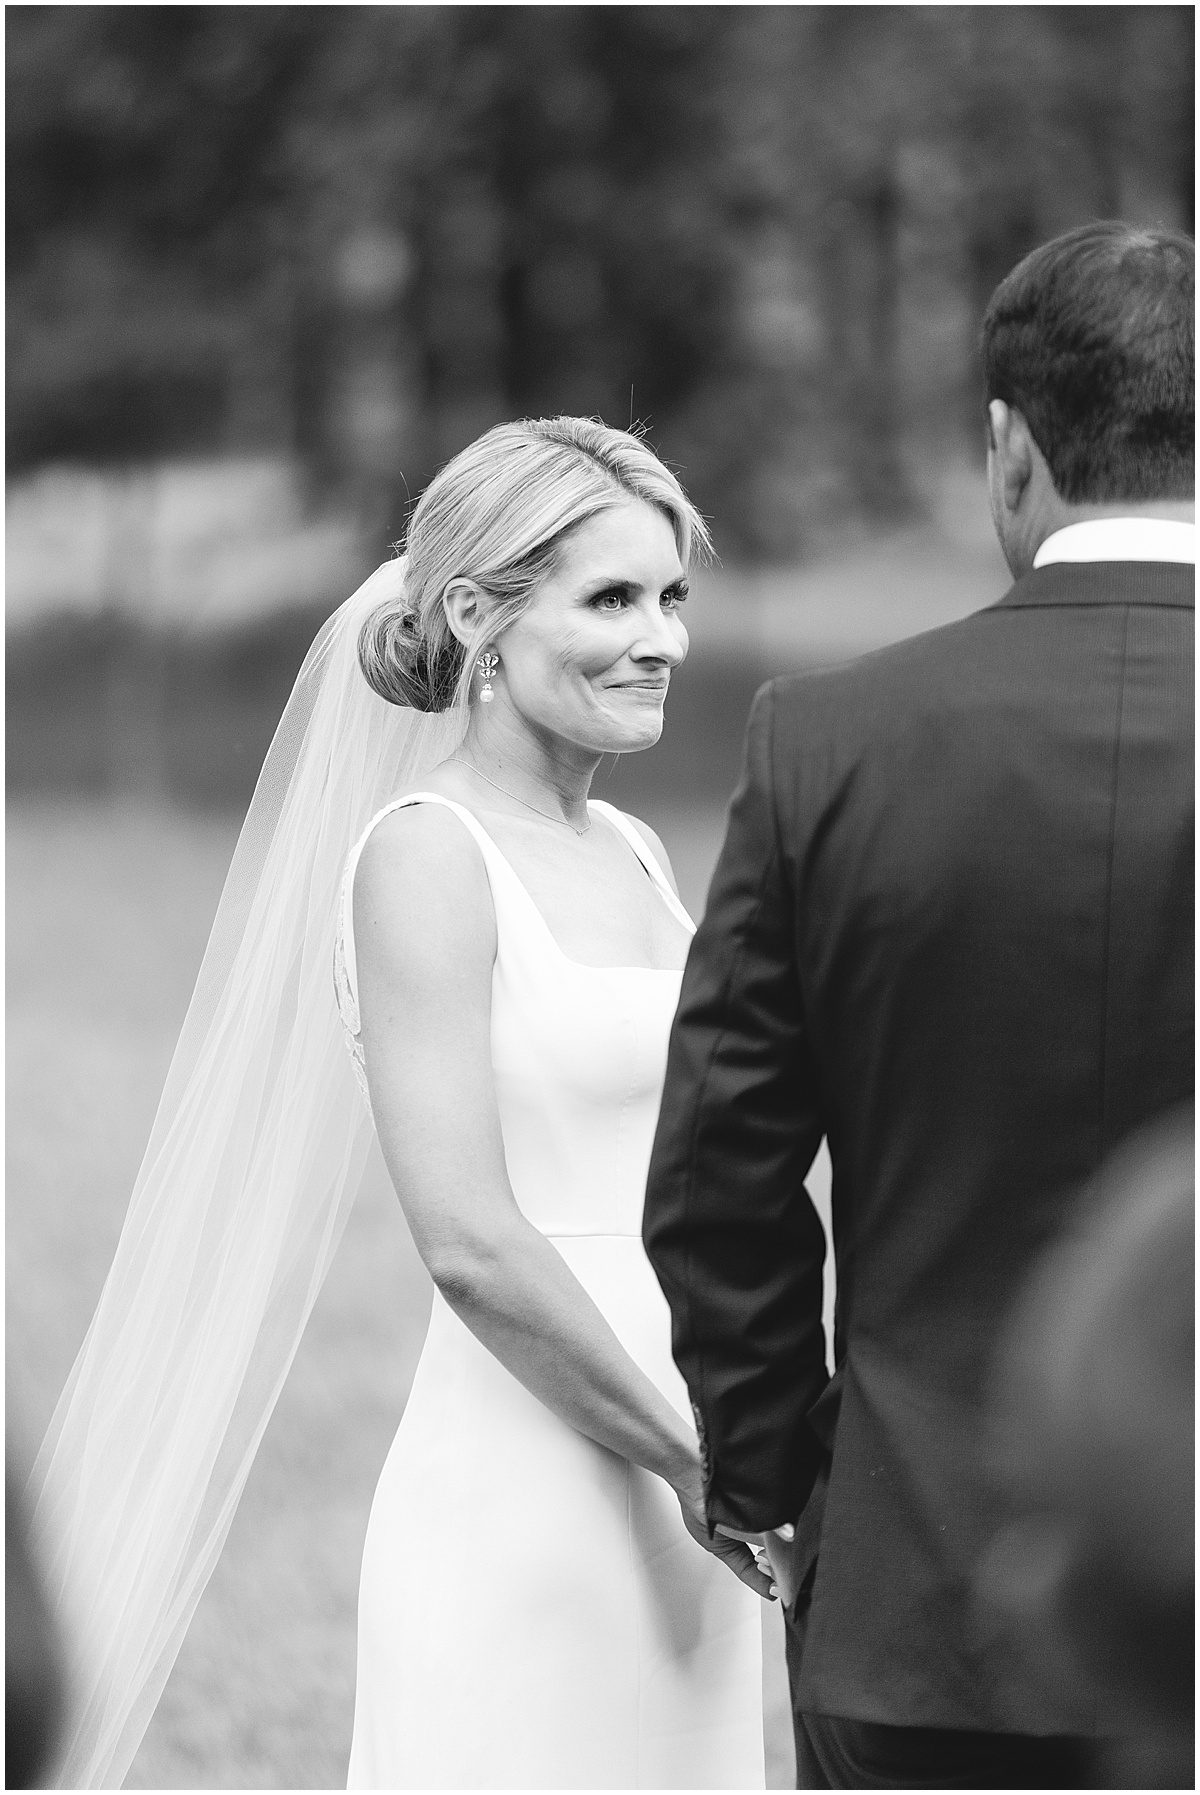 Black and White of Bride Smiling at Groom Photo